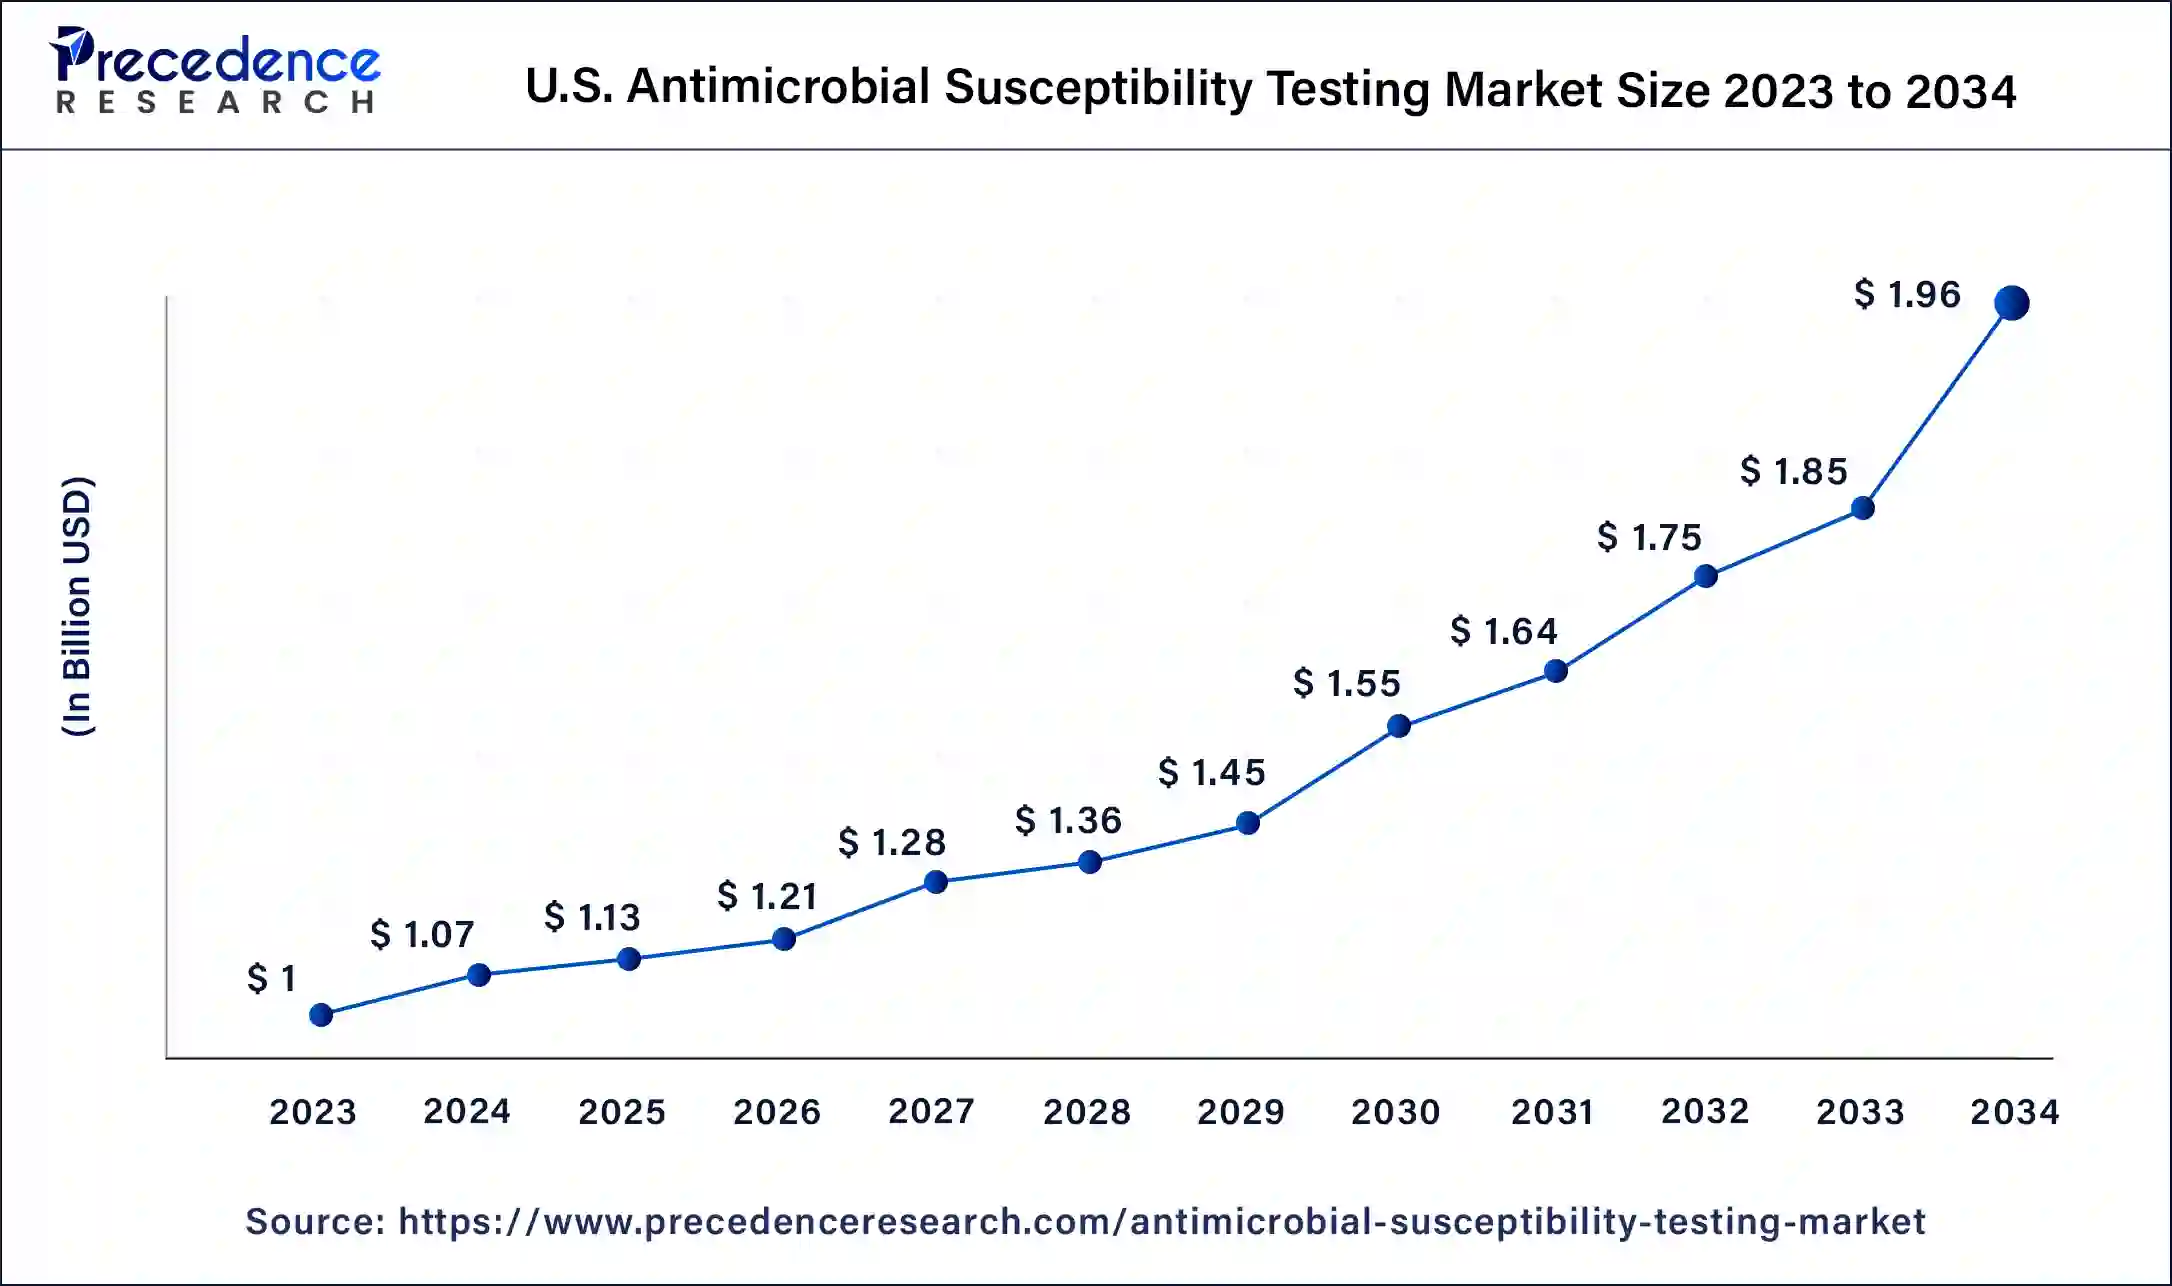 U.S. Antimicrobial Susceptibility Testing Market Size 2024 To 2034